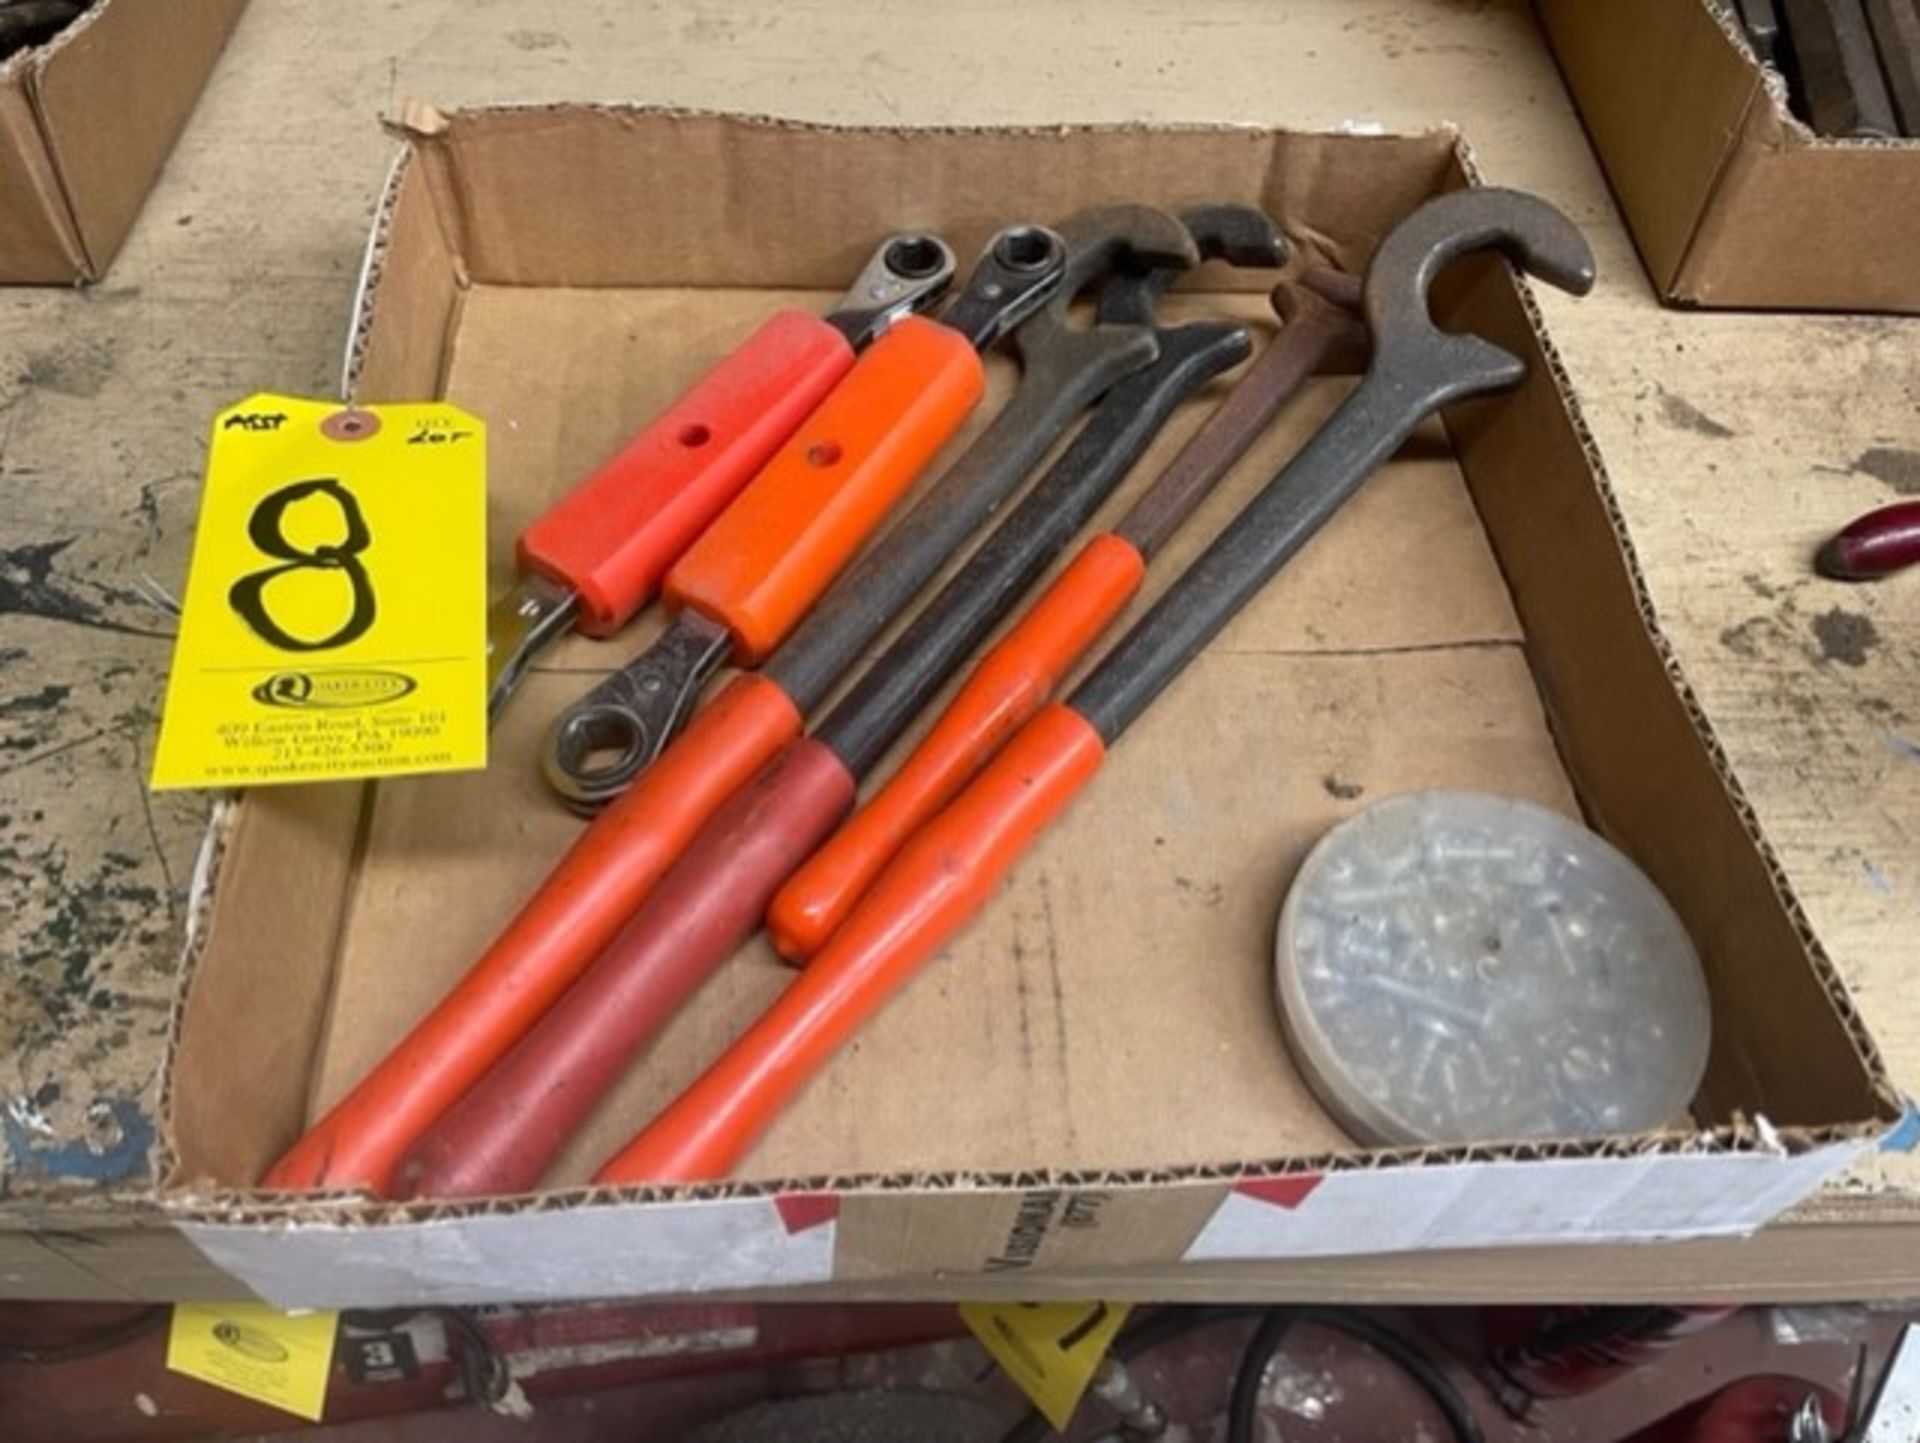 ASSORTED RATCHET WRENCHES AND FLARE LINE NUT OPEN END WRENCHES